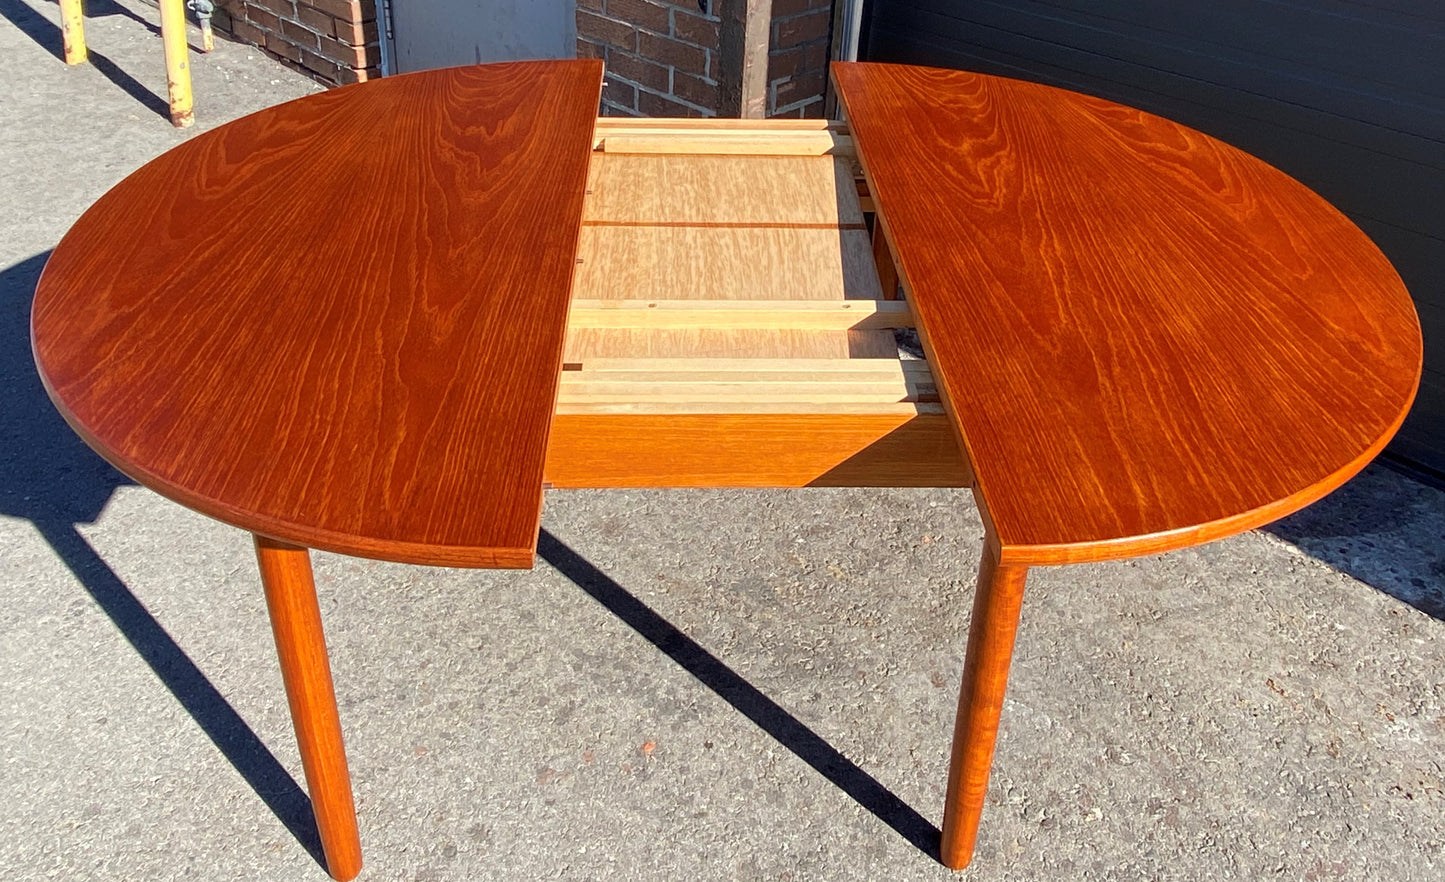 REFINISHED Danish MCM Teak Dining Table Round to Oval w Butterfly Leaf 48"-70" Perfect